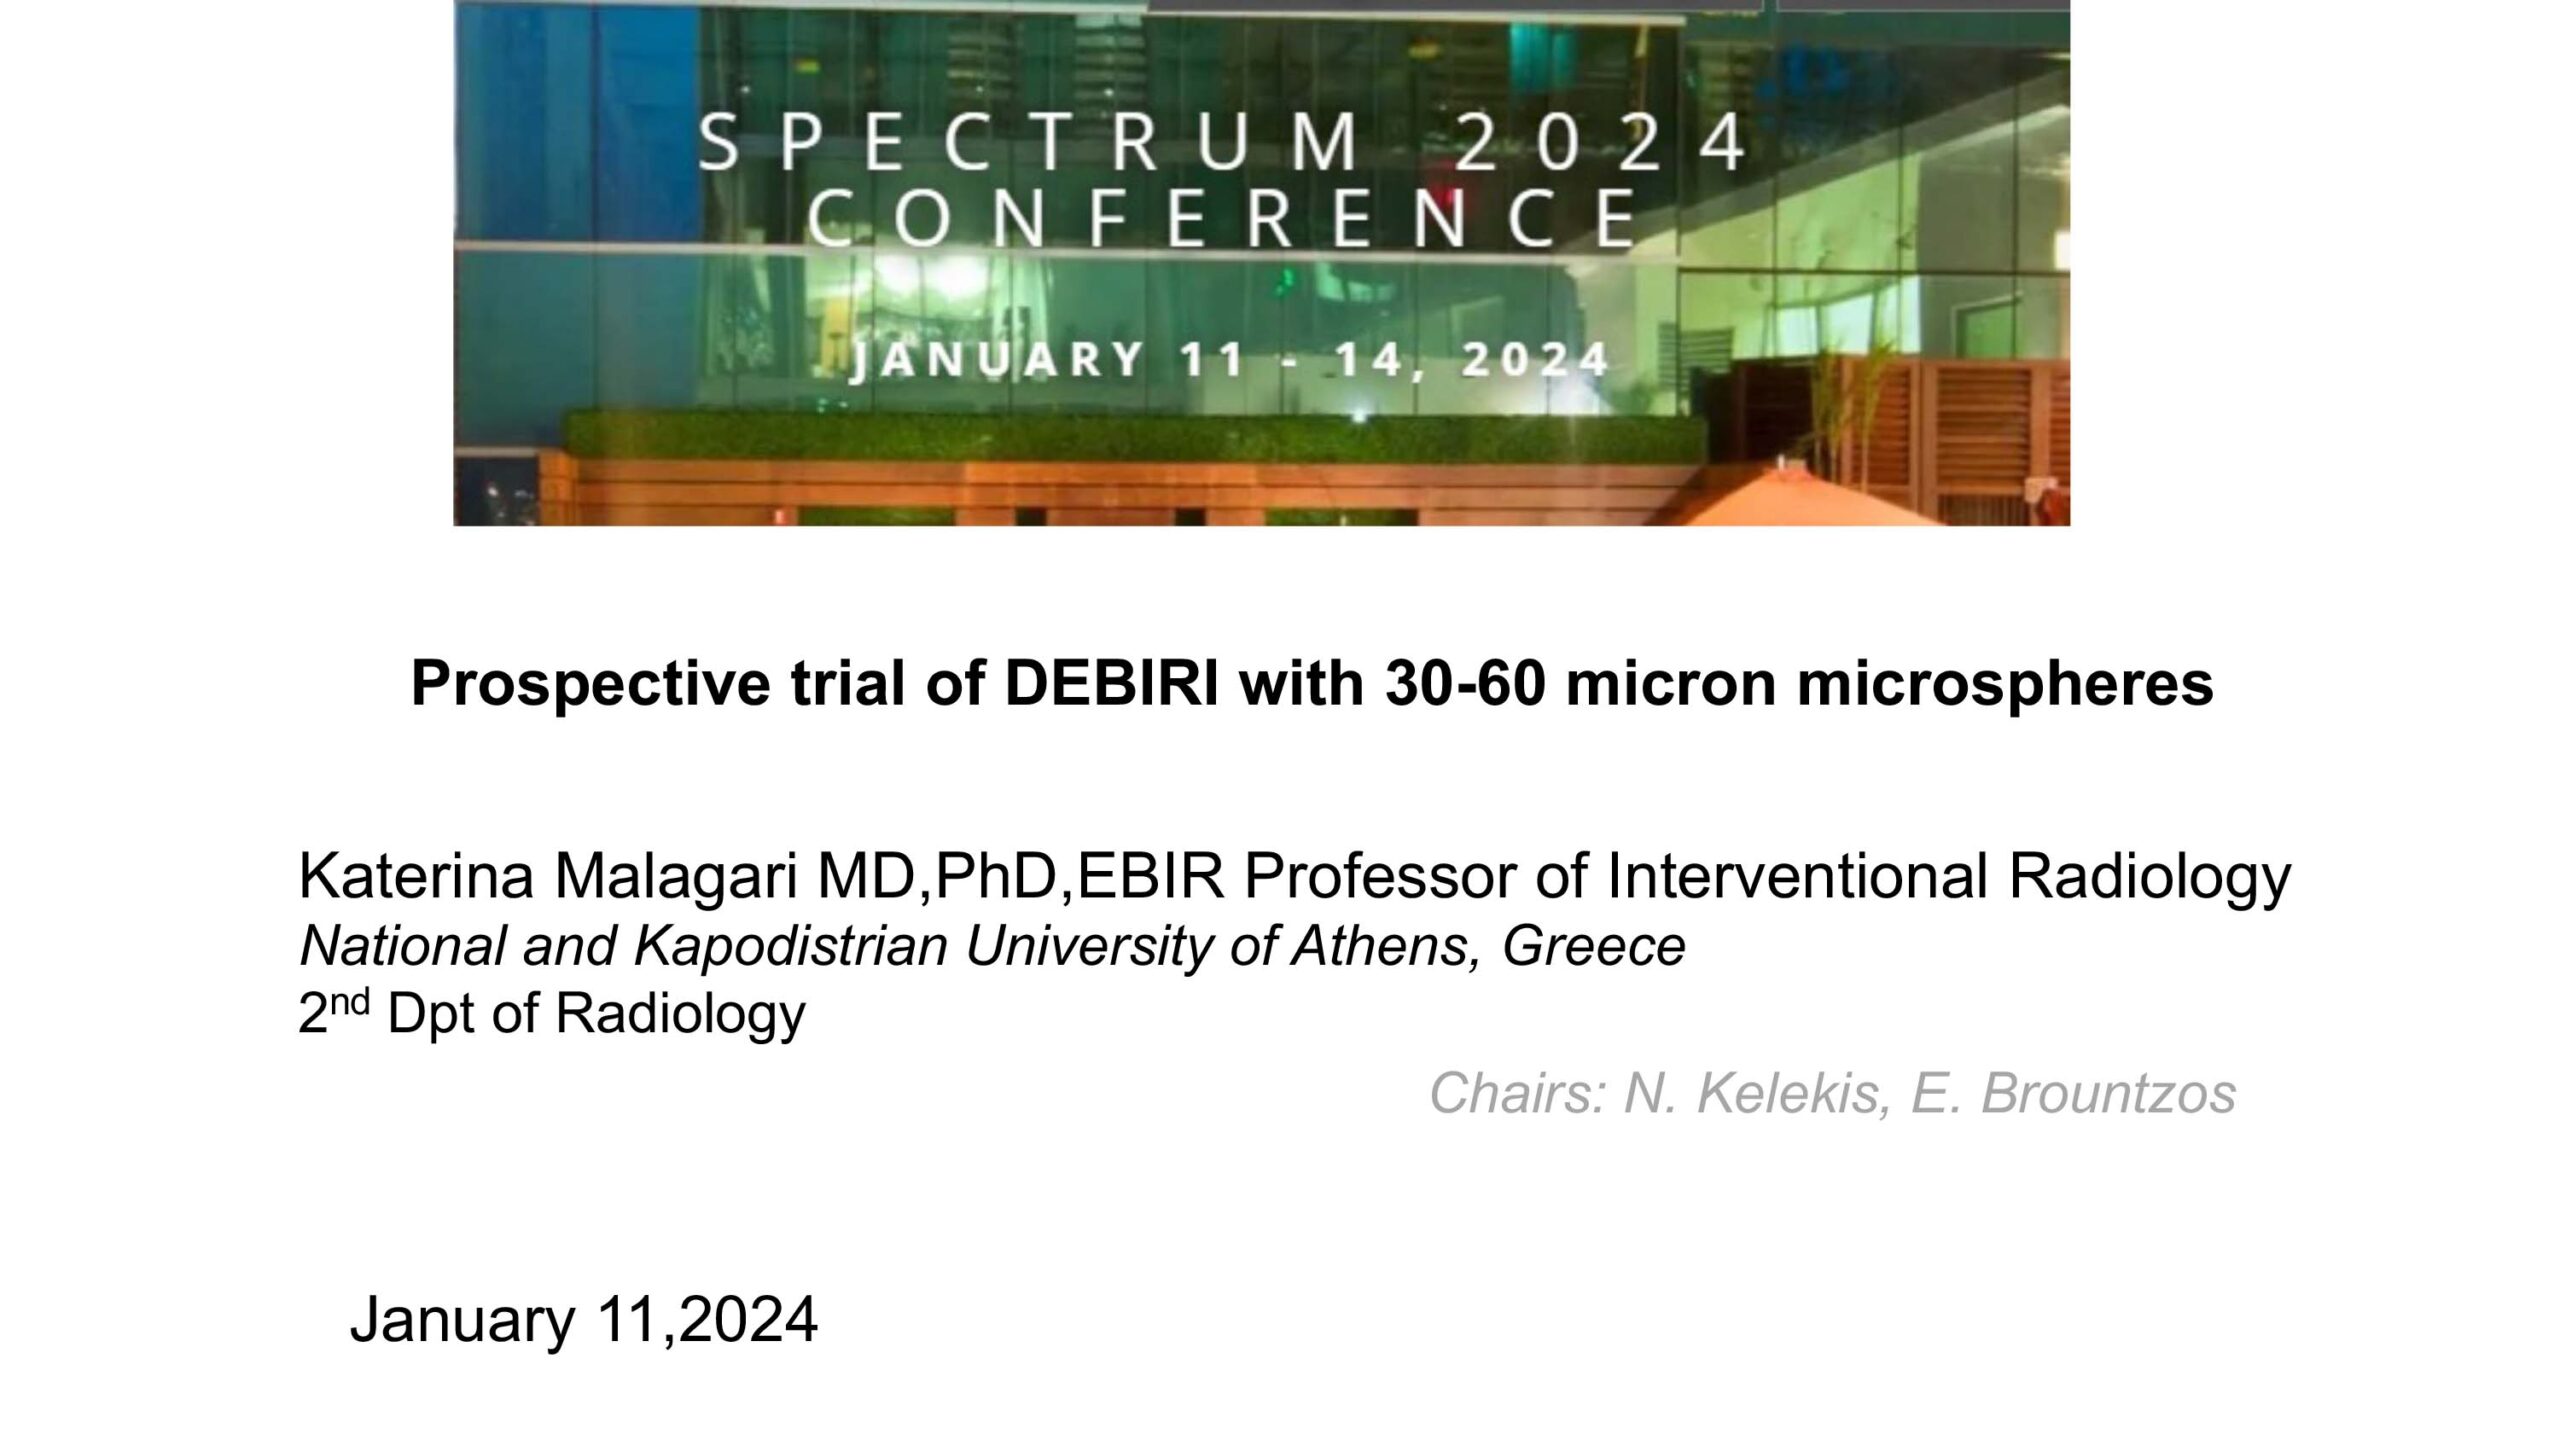 Prospective trial of DEBIRI with 30-60 micron microspheres